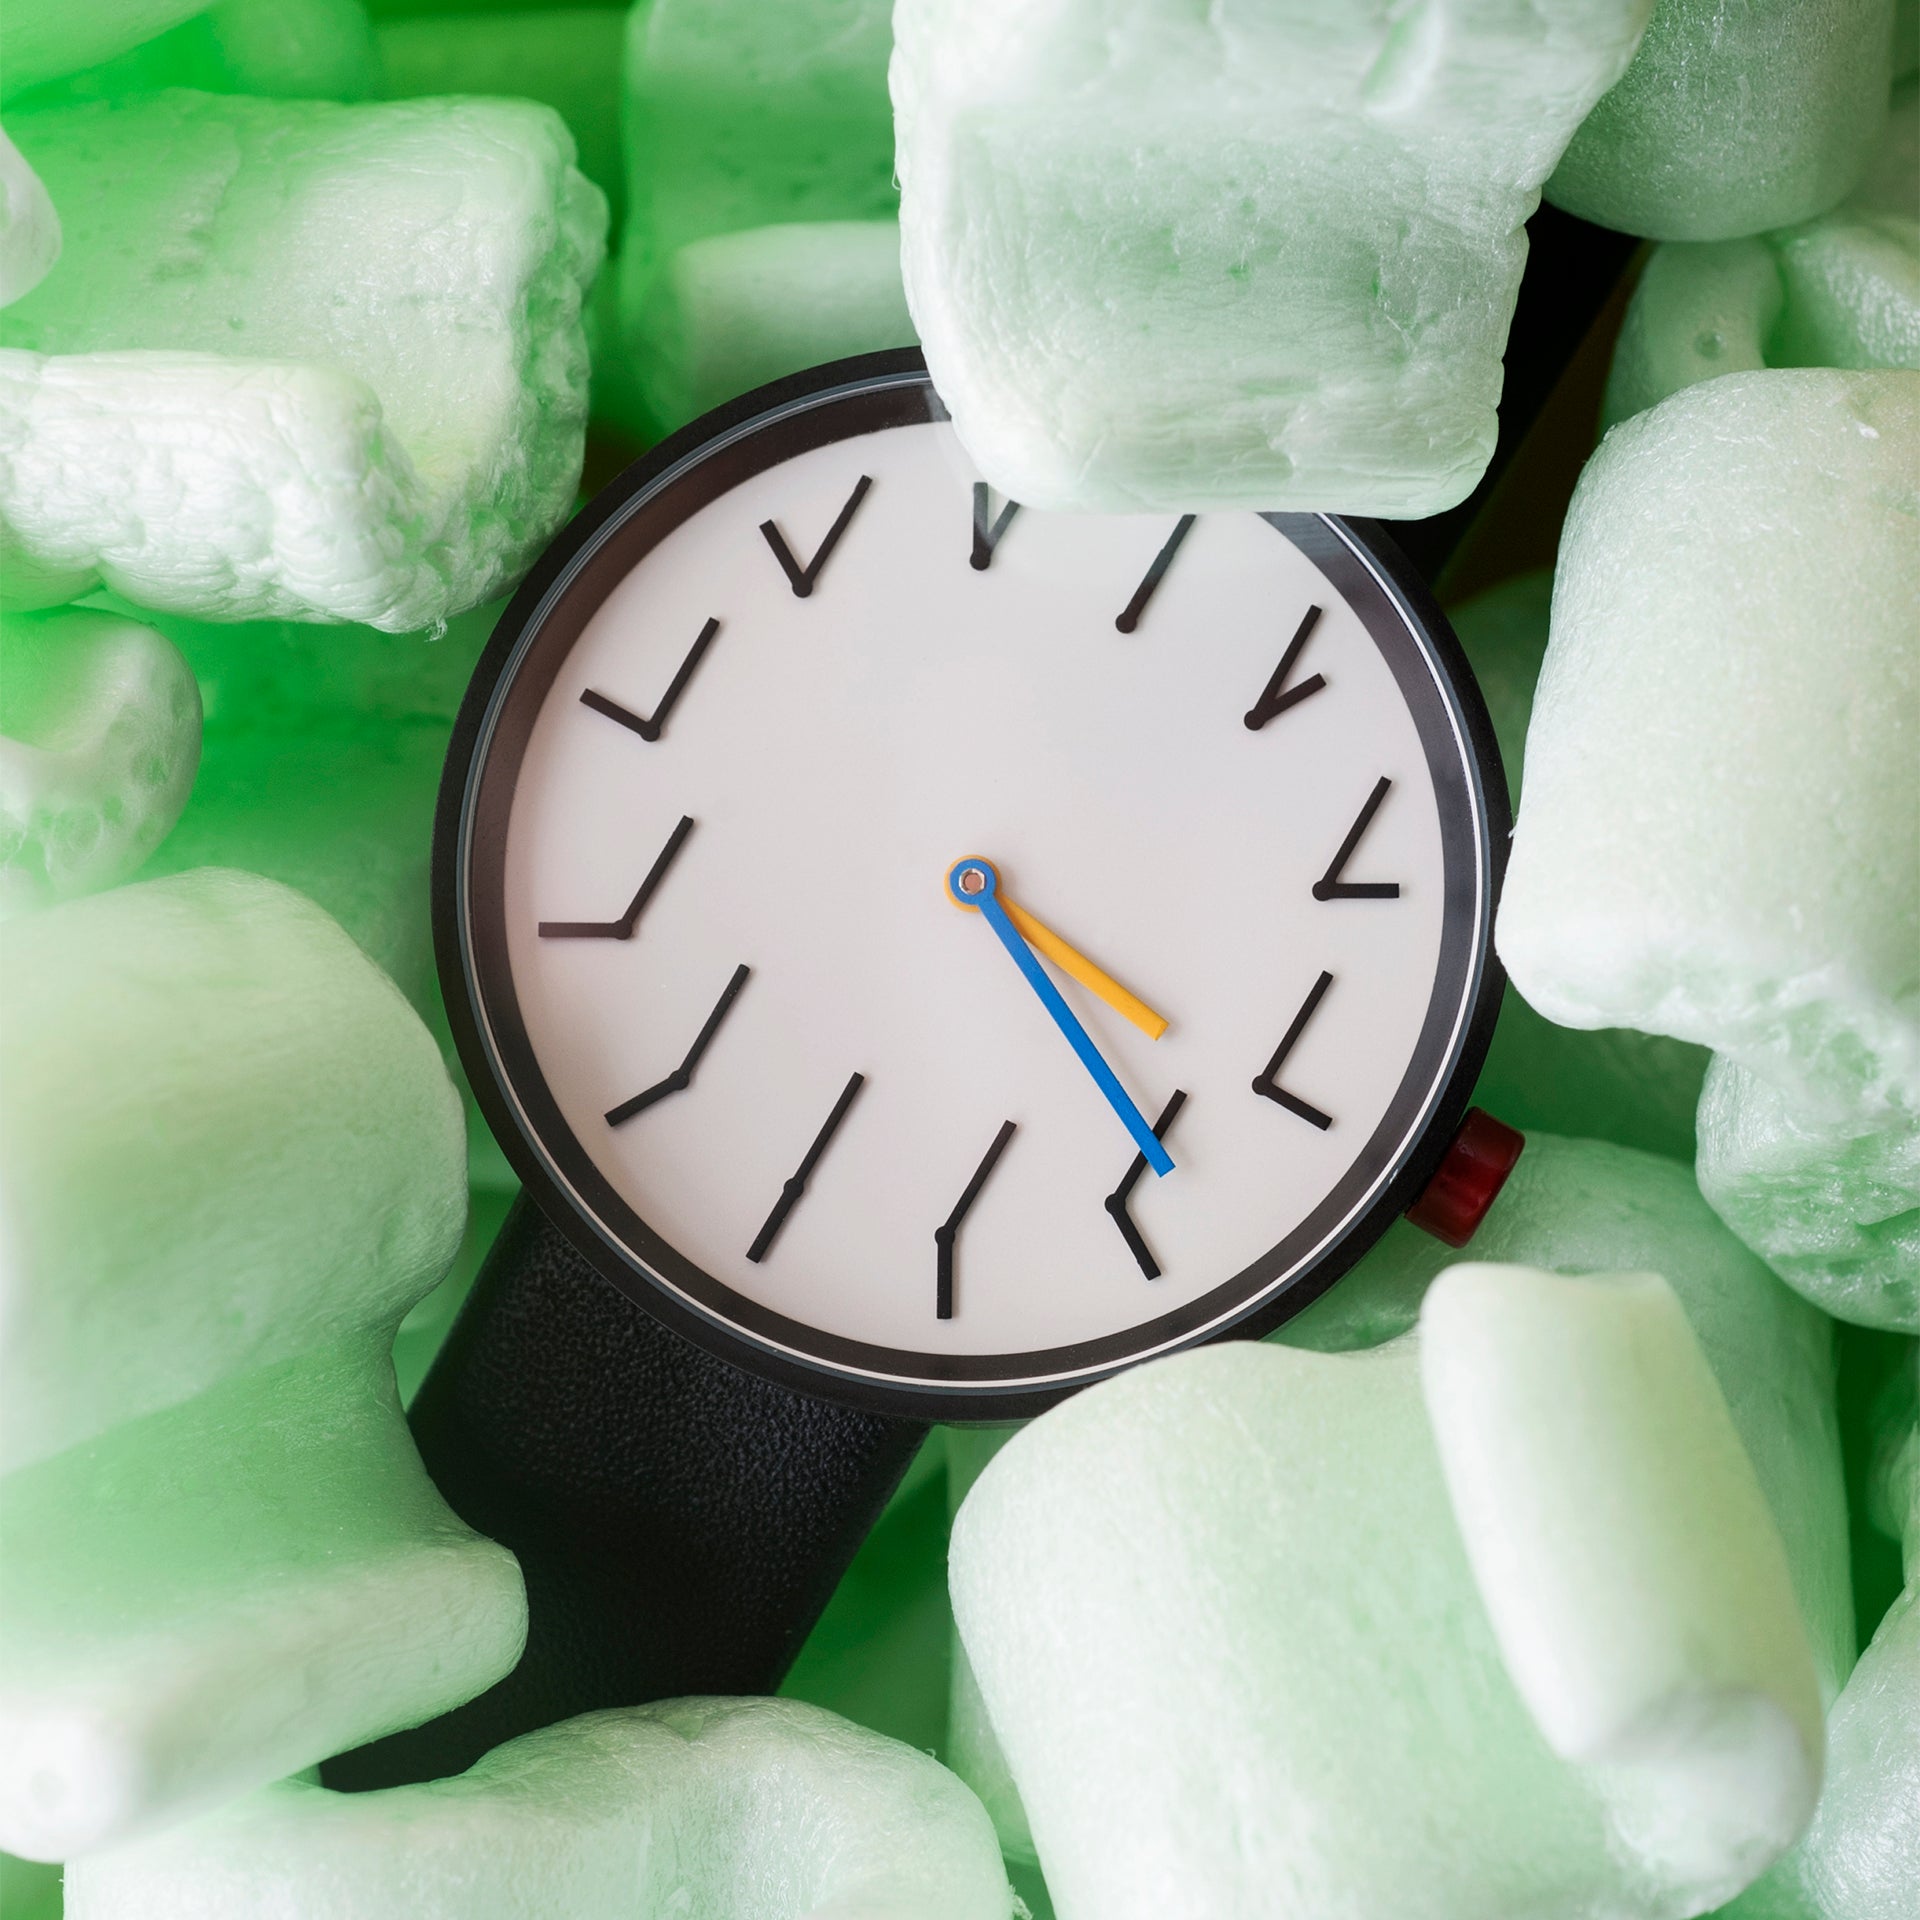 The trio of time - Redundant watch with a minimalist white dial, black strap, and distinctive blue and yellow hands, nestled among soft green packing foam